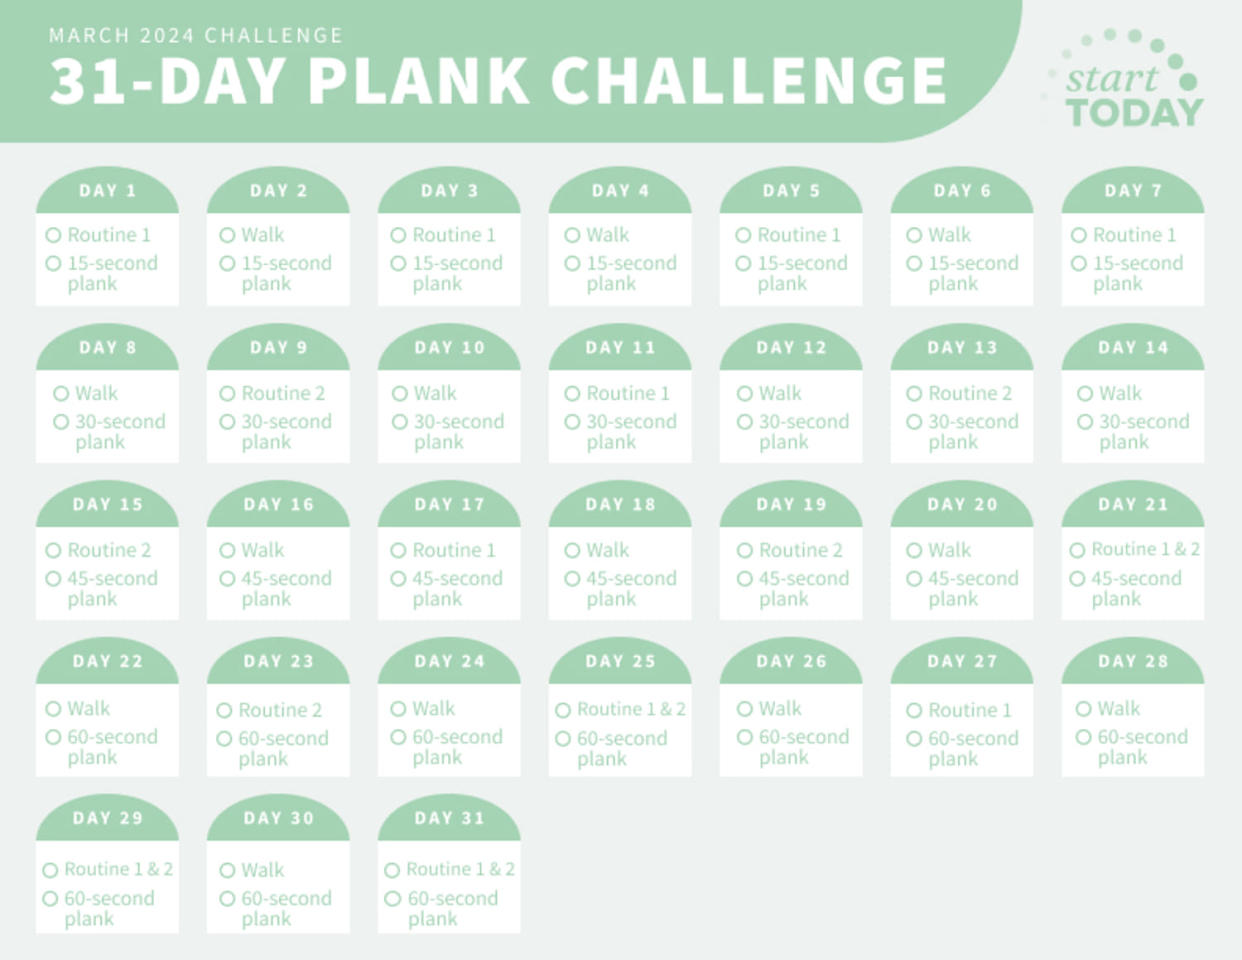 A 31-day plank challenge to strengthen your core and boost metabolism